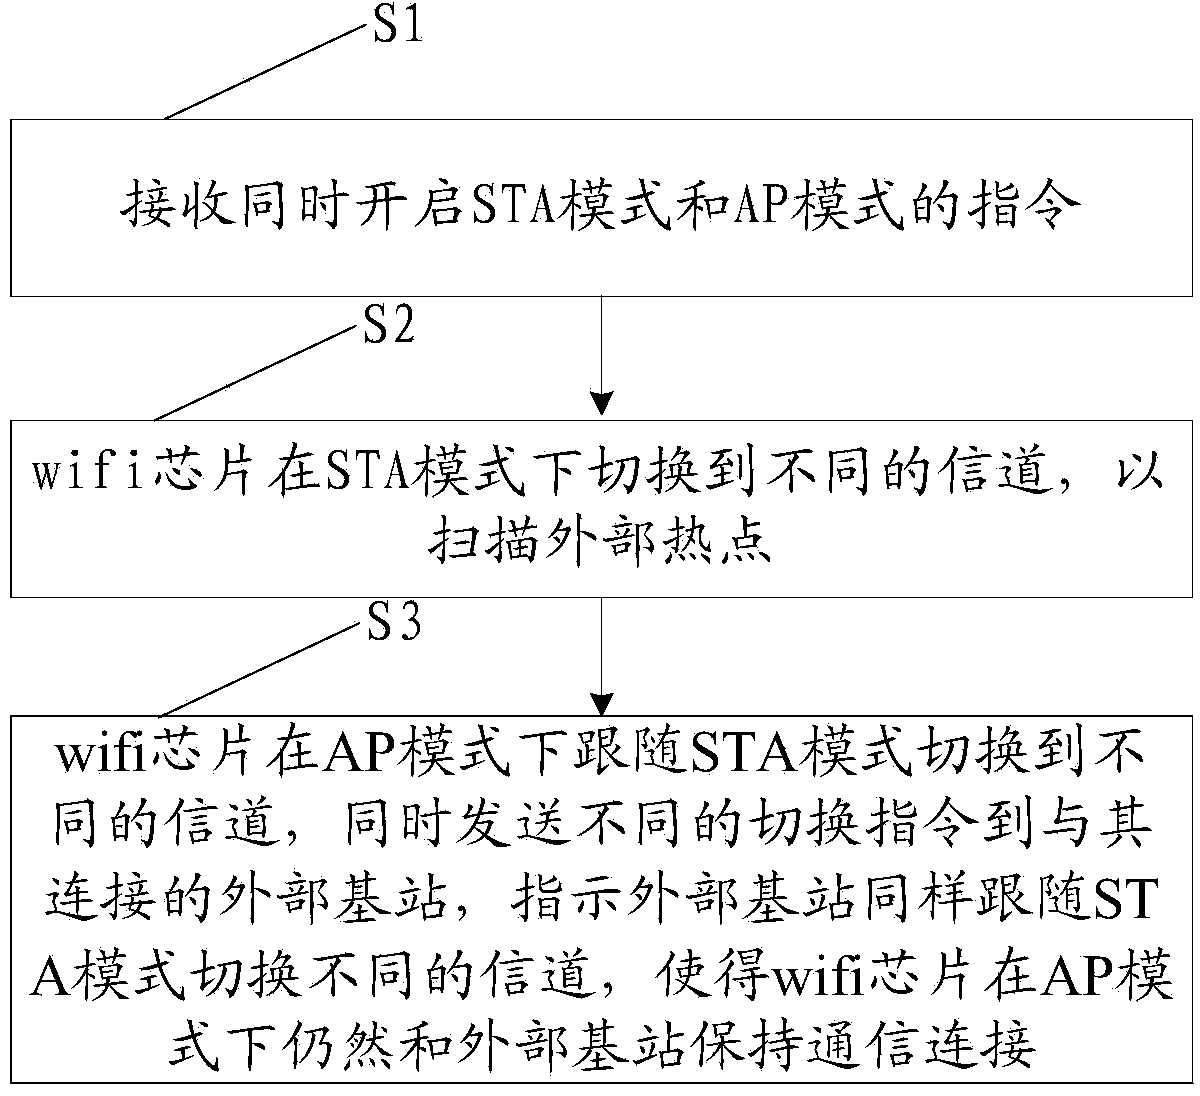 Wifi chip and control method during coexistence of station (STA) mode and access point (AP) mode